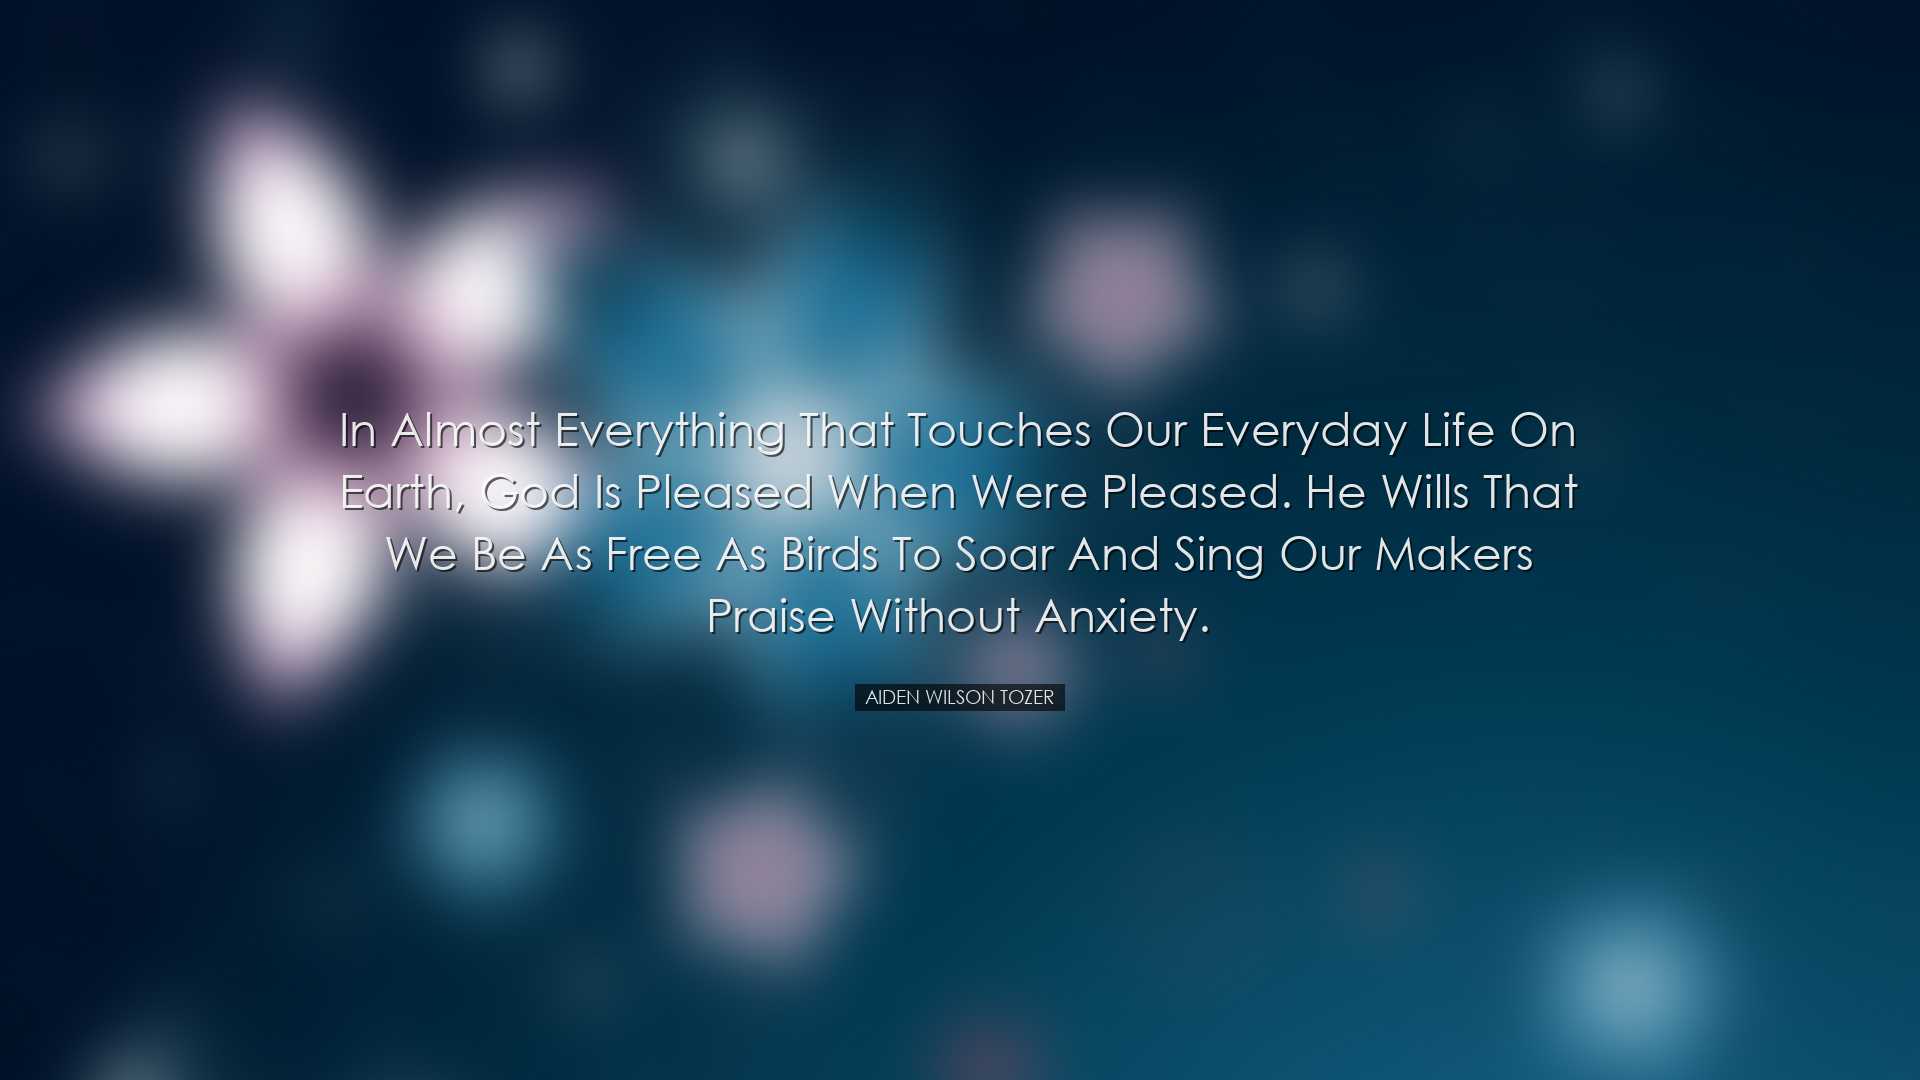 In almost everything that touches our everyday life on earth, God